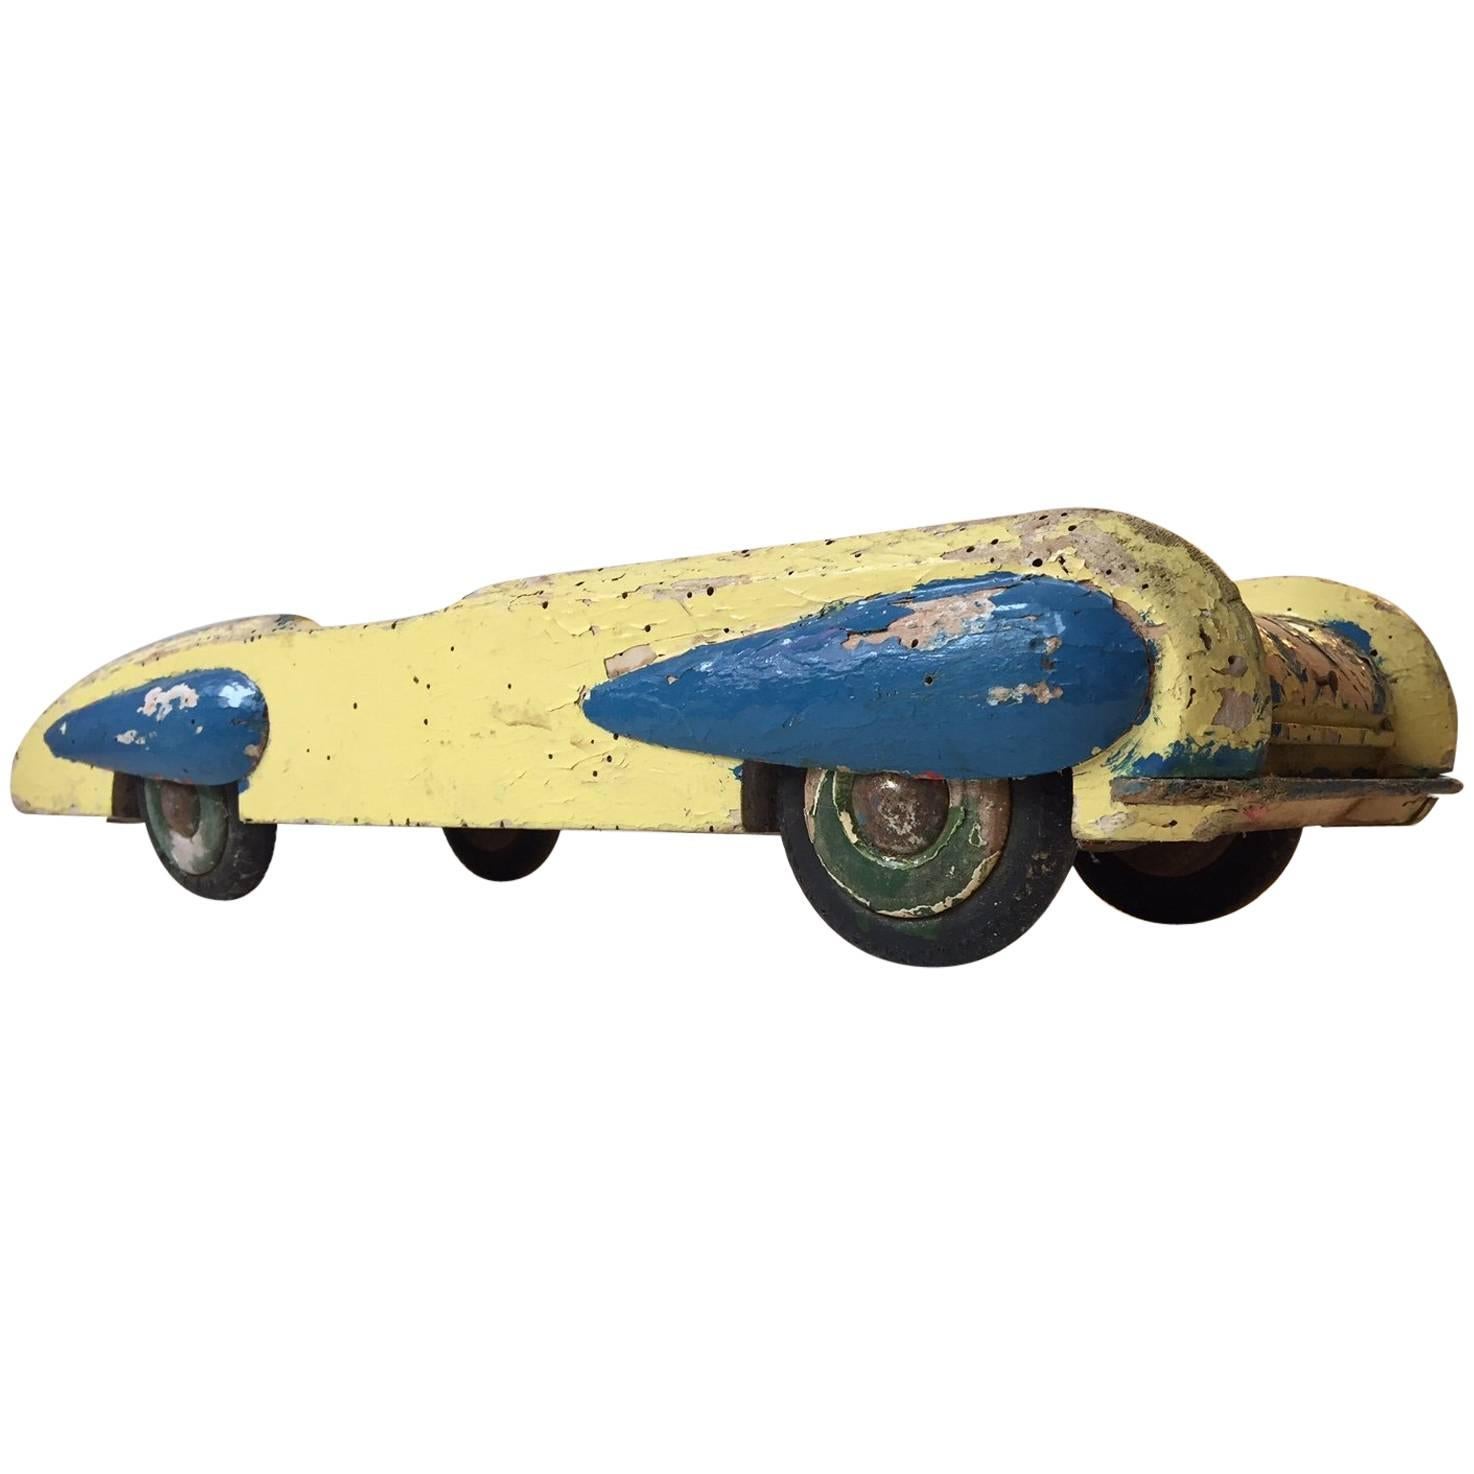 Unique, Decorative & Rustic 1930s Streamlined Wooden Toy Car with Dunlop Tires